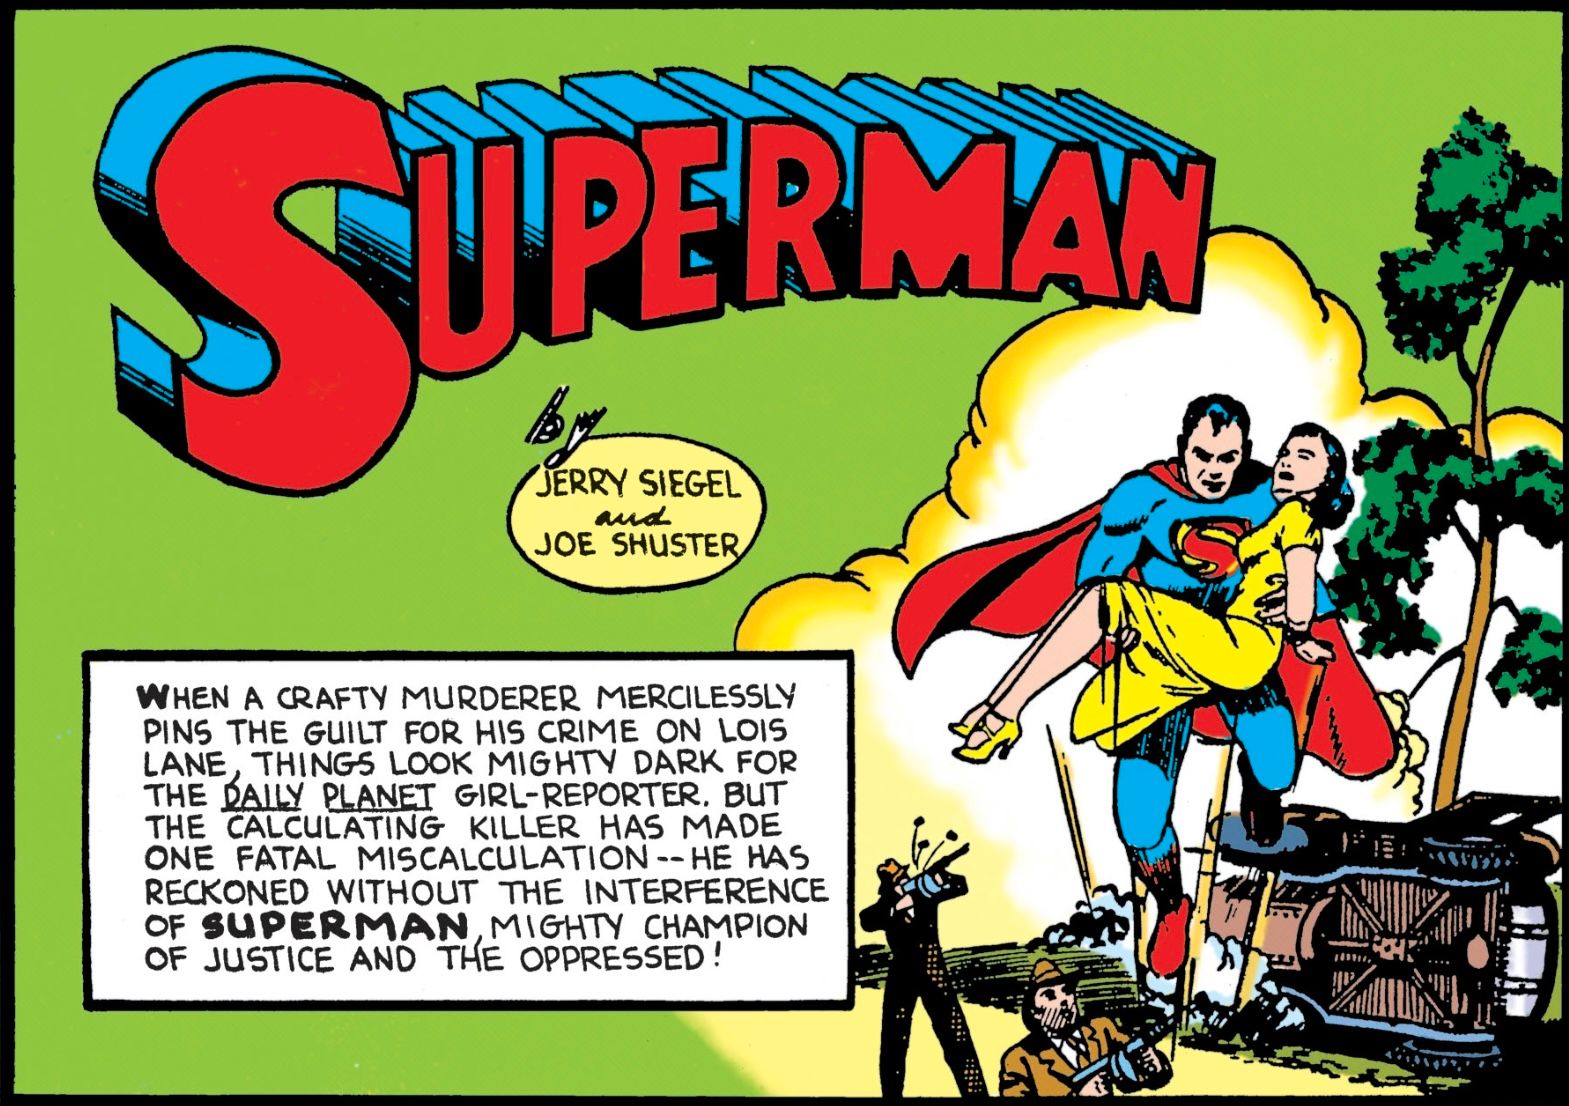 the first panel of Superman #6. Superman is shown carrying a tied up Lois and being shot at. Text reads WHEN A CRAFTY MURDERER MERCILESSLY PINS THE GUILT FOR HIS CRIME ON LOIS LANE THINGS LOOK MIGHTY DARK FOR THE DAILY PLANET GIRL-REPORTER. BUT THE CALCULATING KILLER HAS MADE ONE FATAL MISCALCULATION –HE HAS RECKONED WITHOUT THE INTERFERENCE OF SUPERMAN, MIGHTY CHAMPION OF JUSTICE AND THE OPPRESSED!